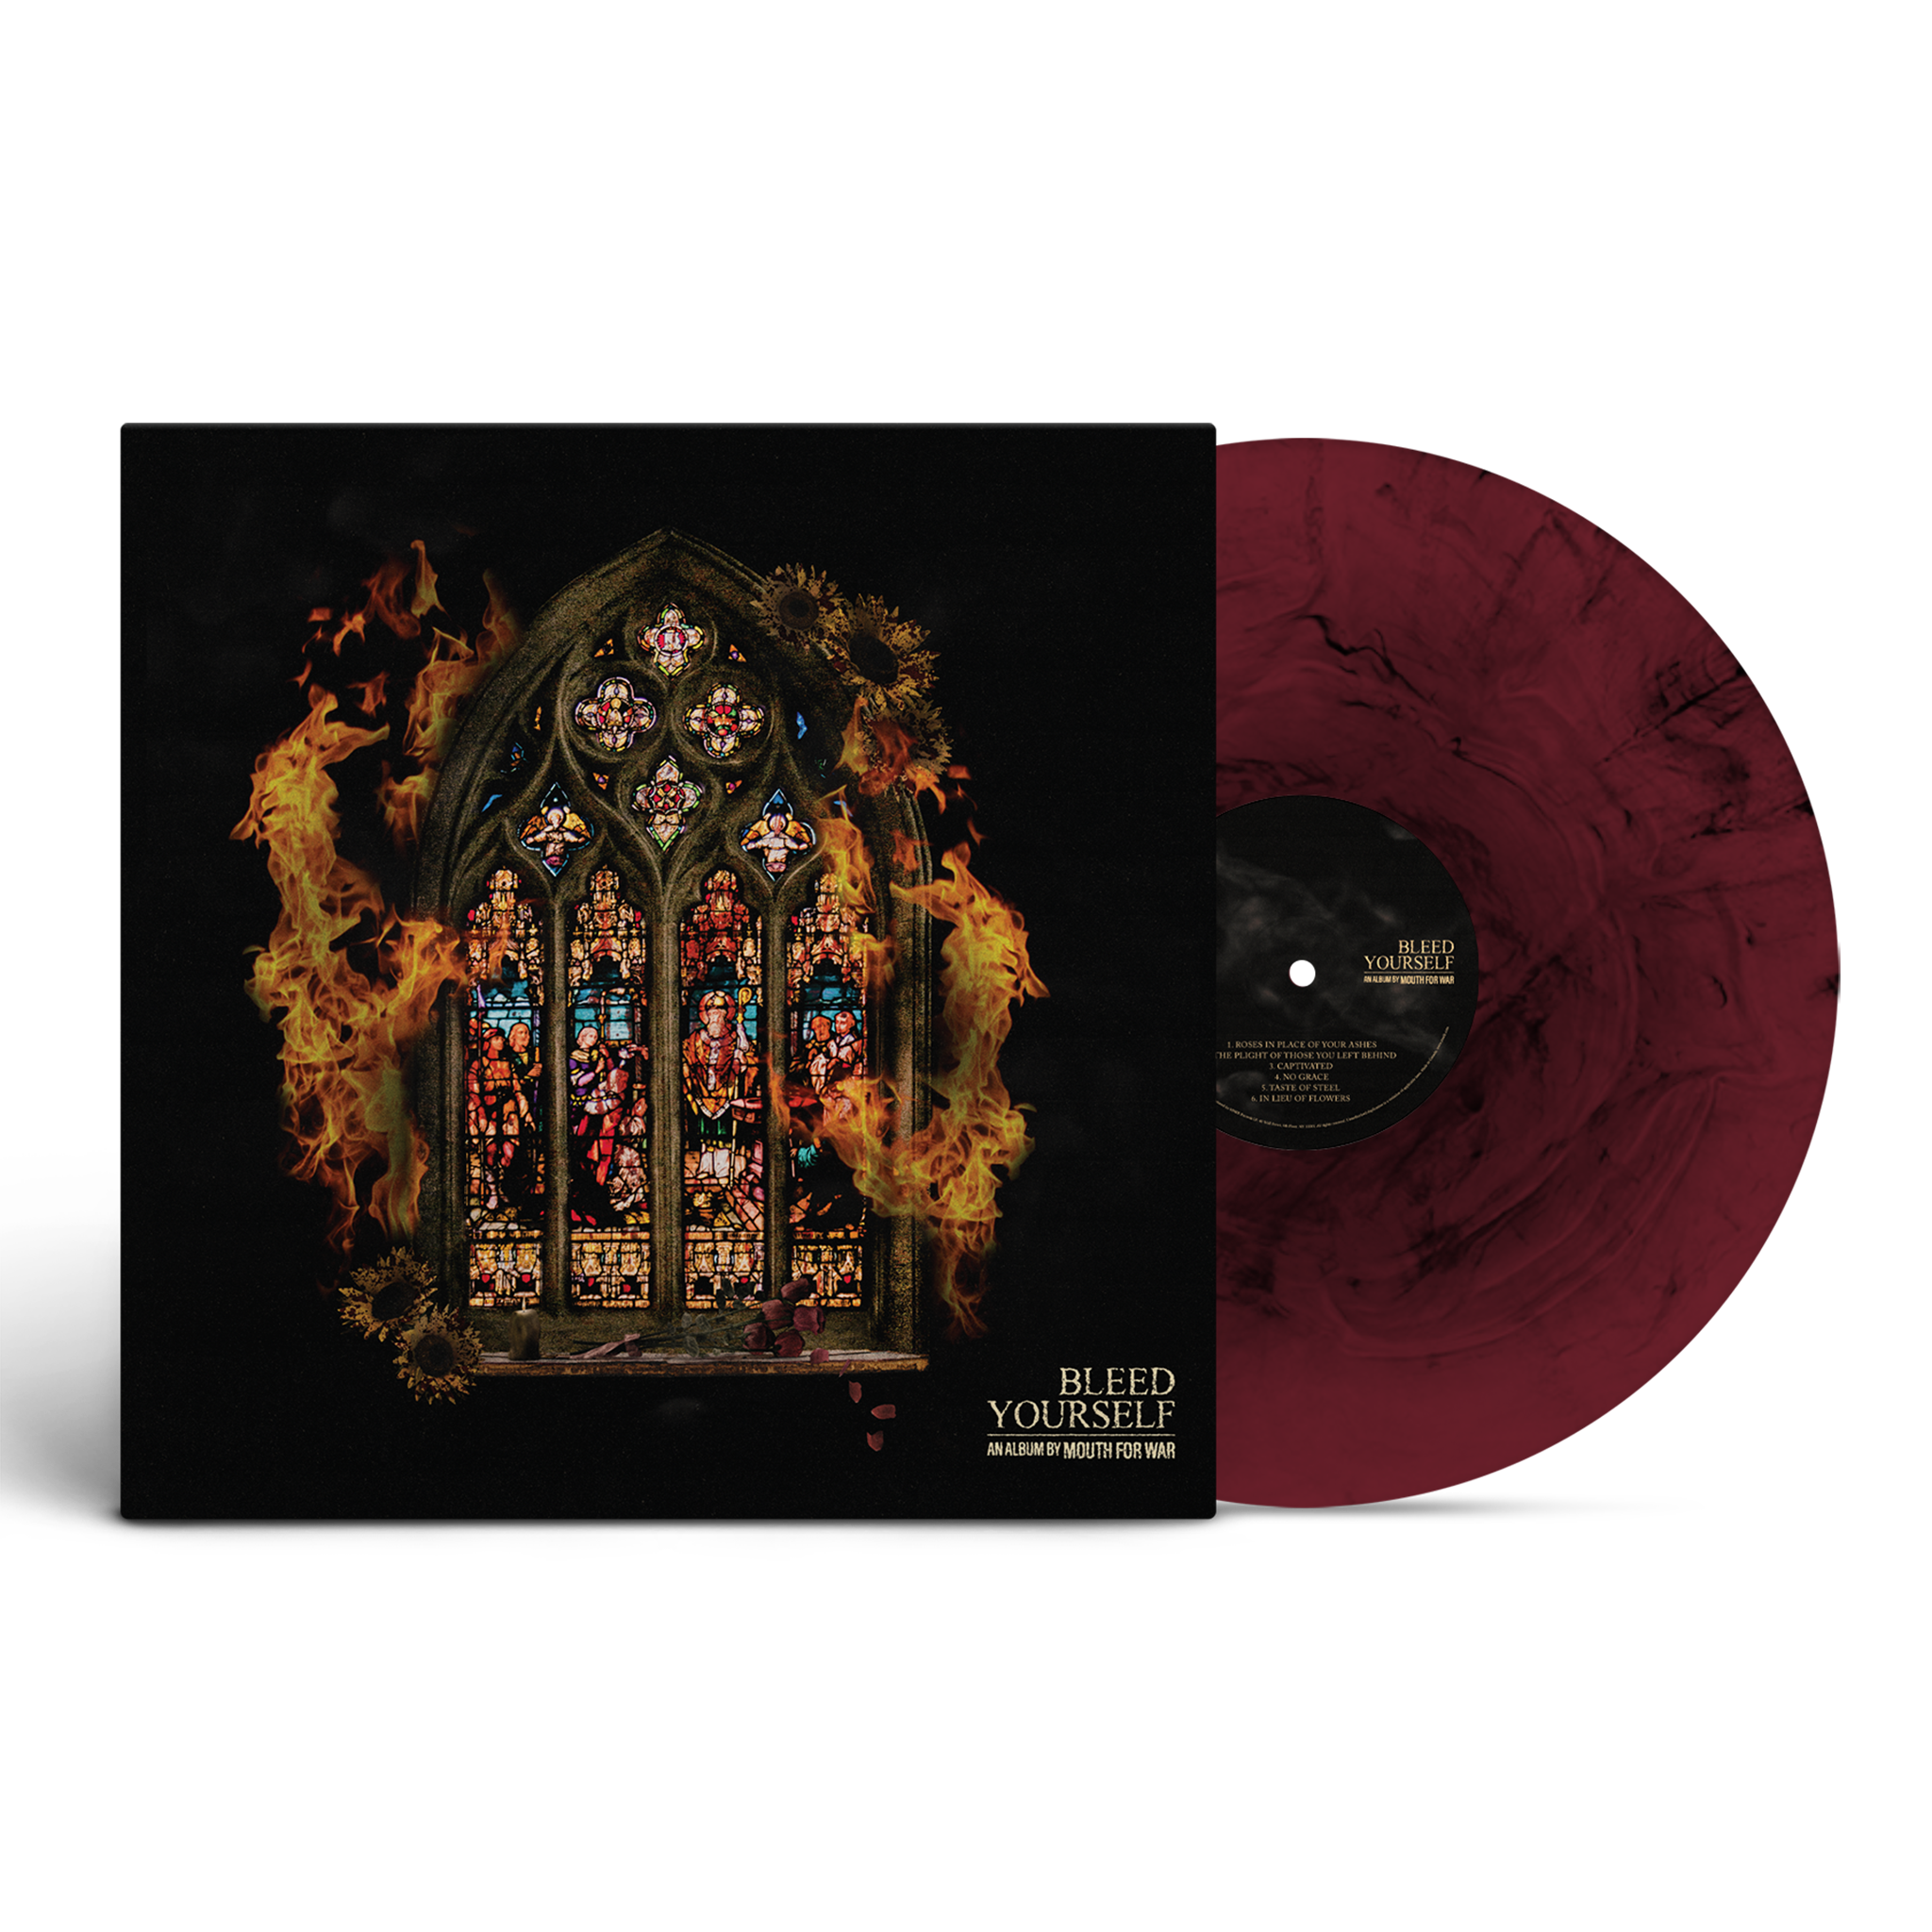 Bleed Yourself Available on Vinyl. Available now on MNRK Heavy